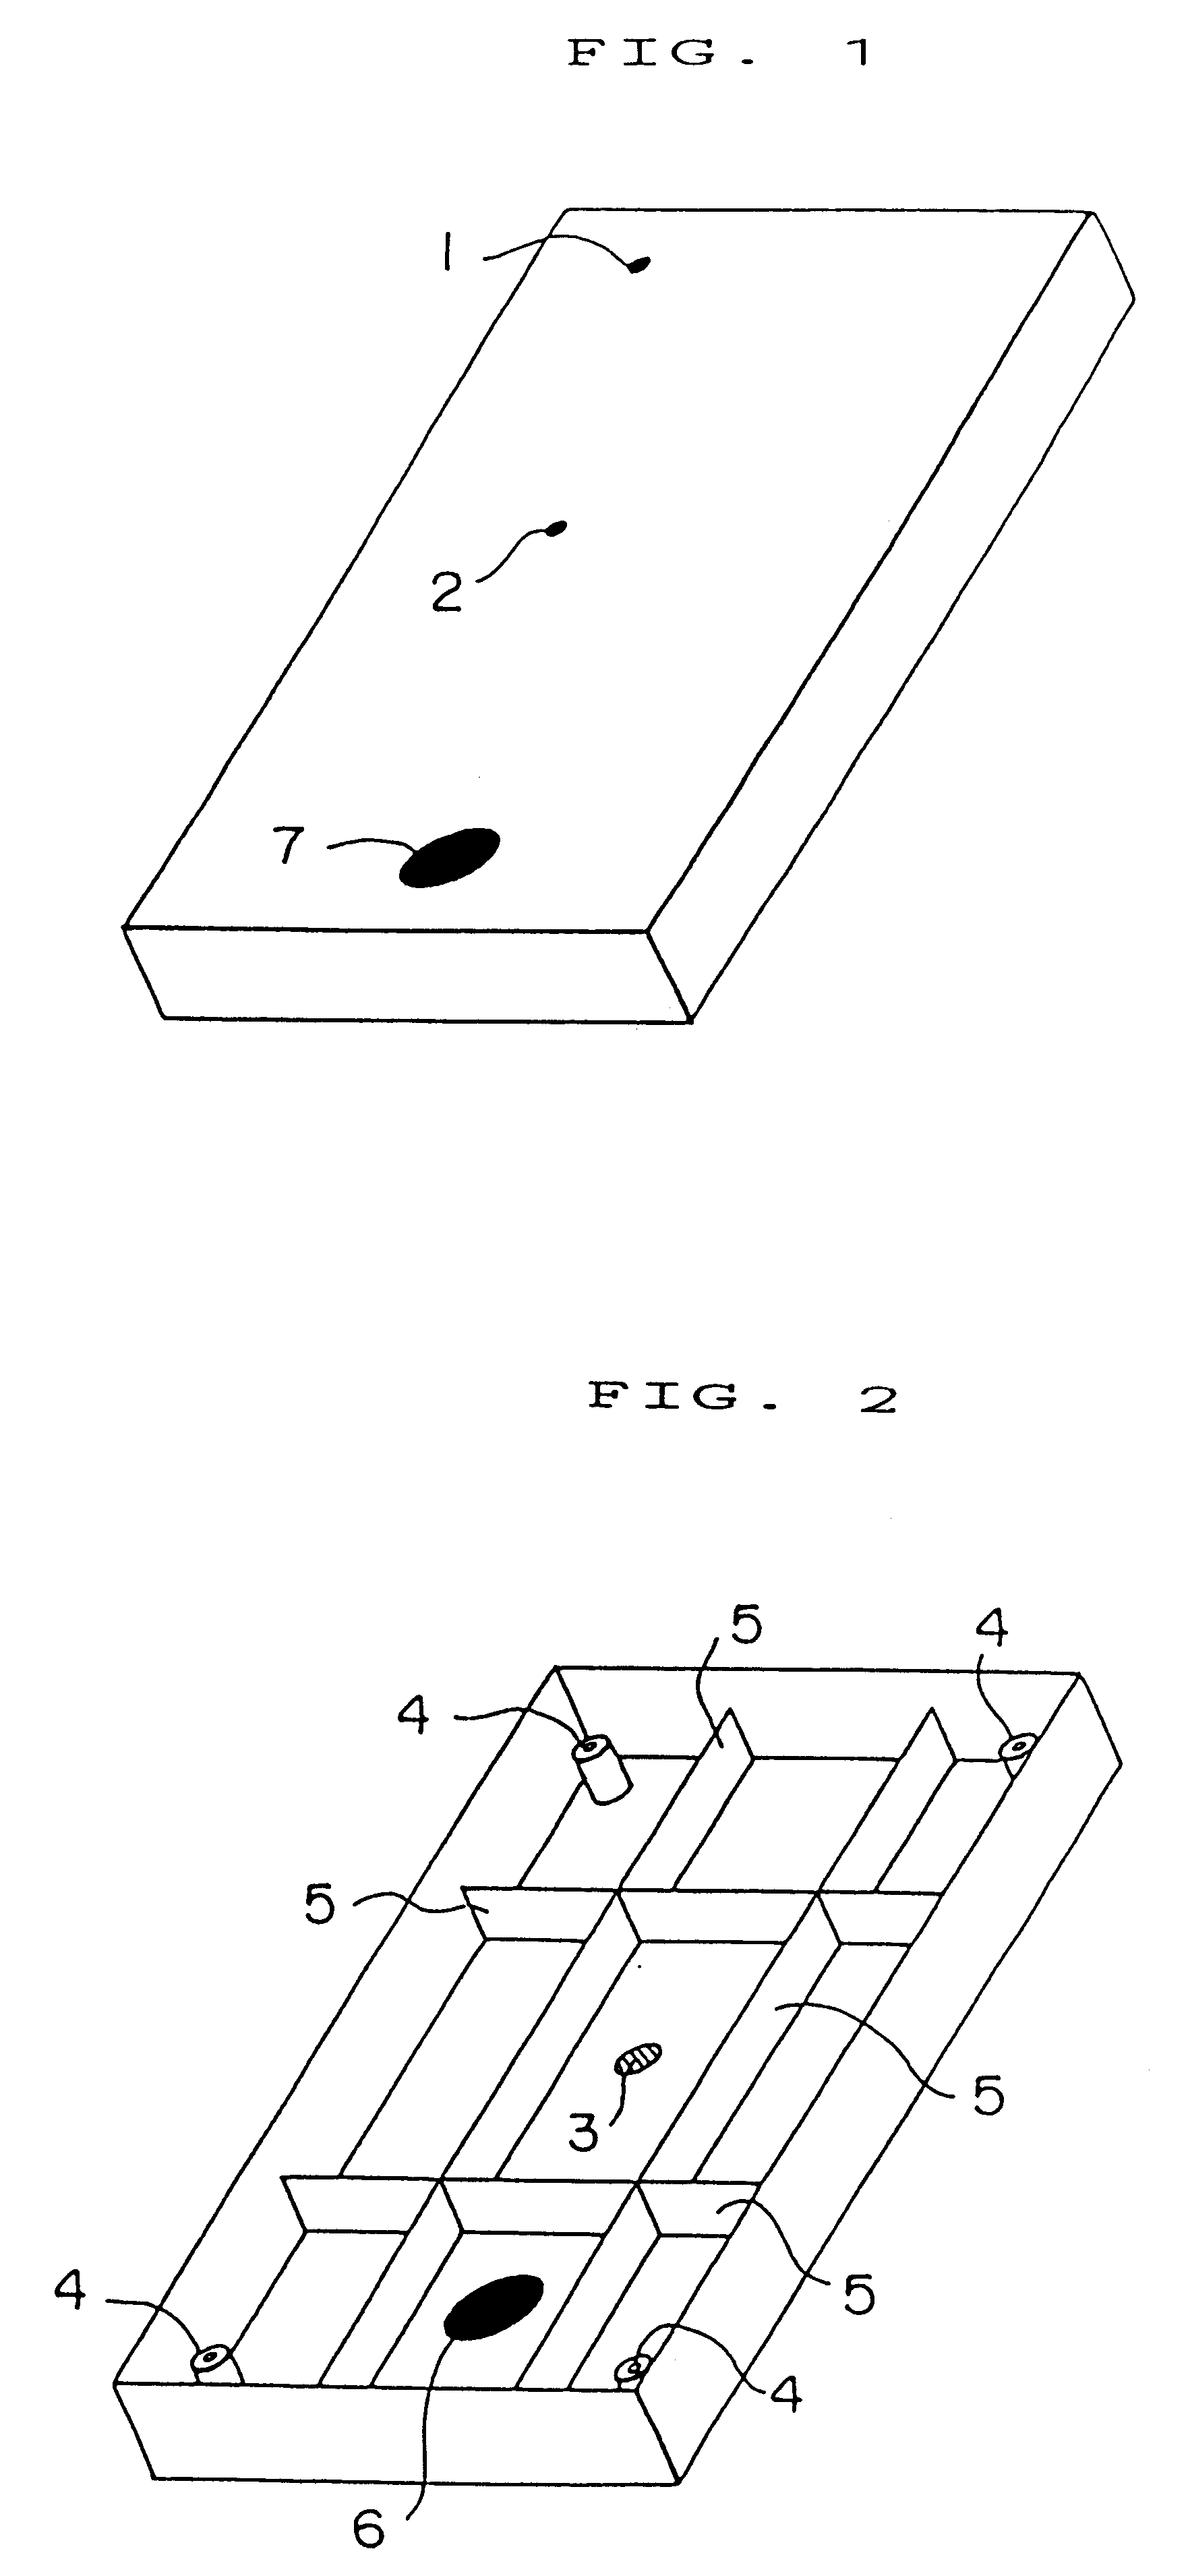 Process of injection molding a foamable plastic composition